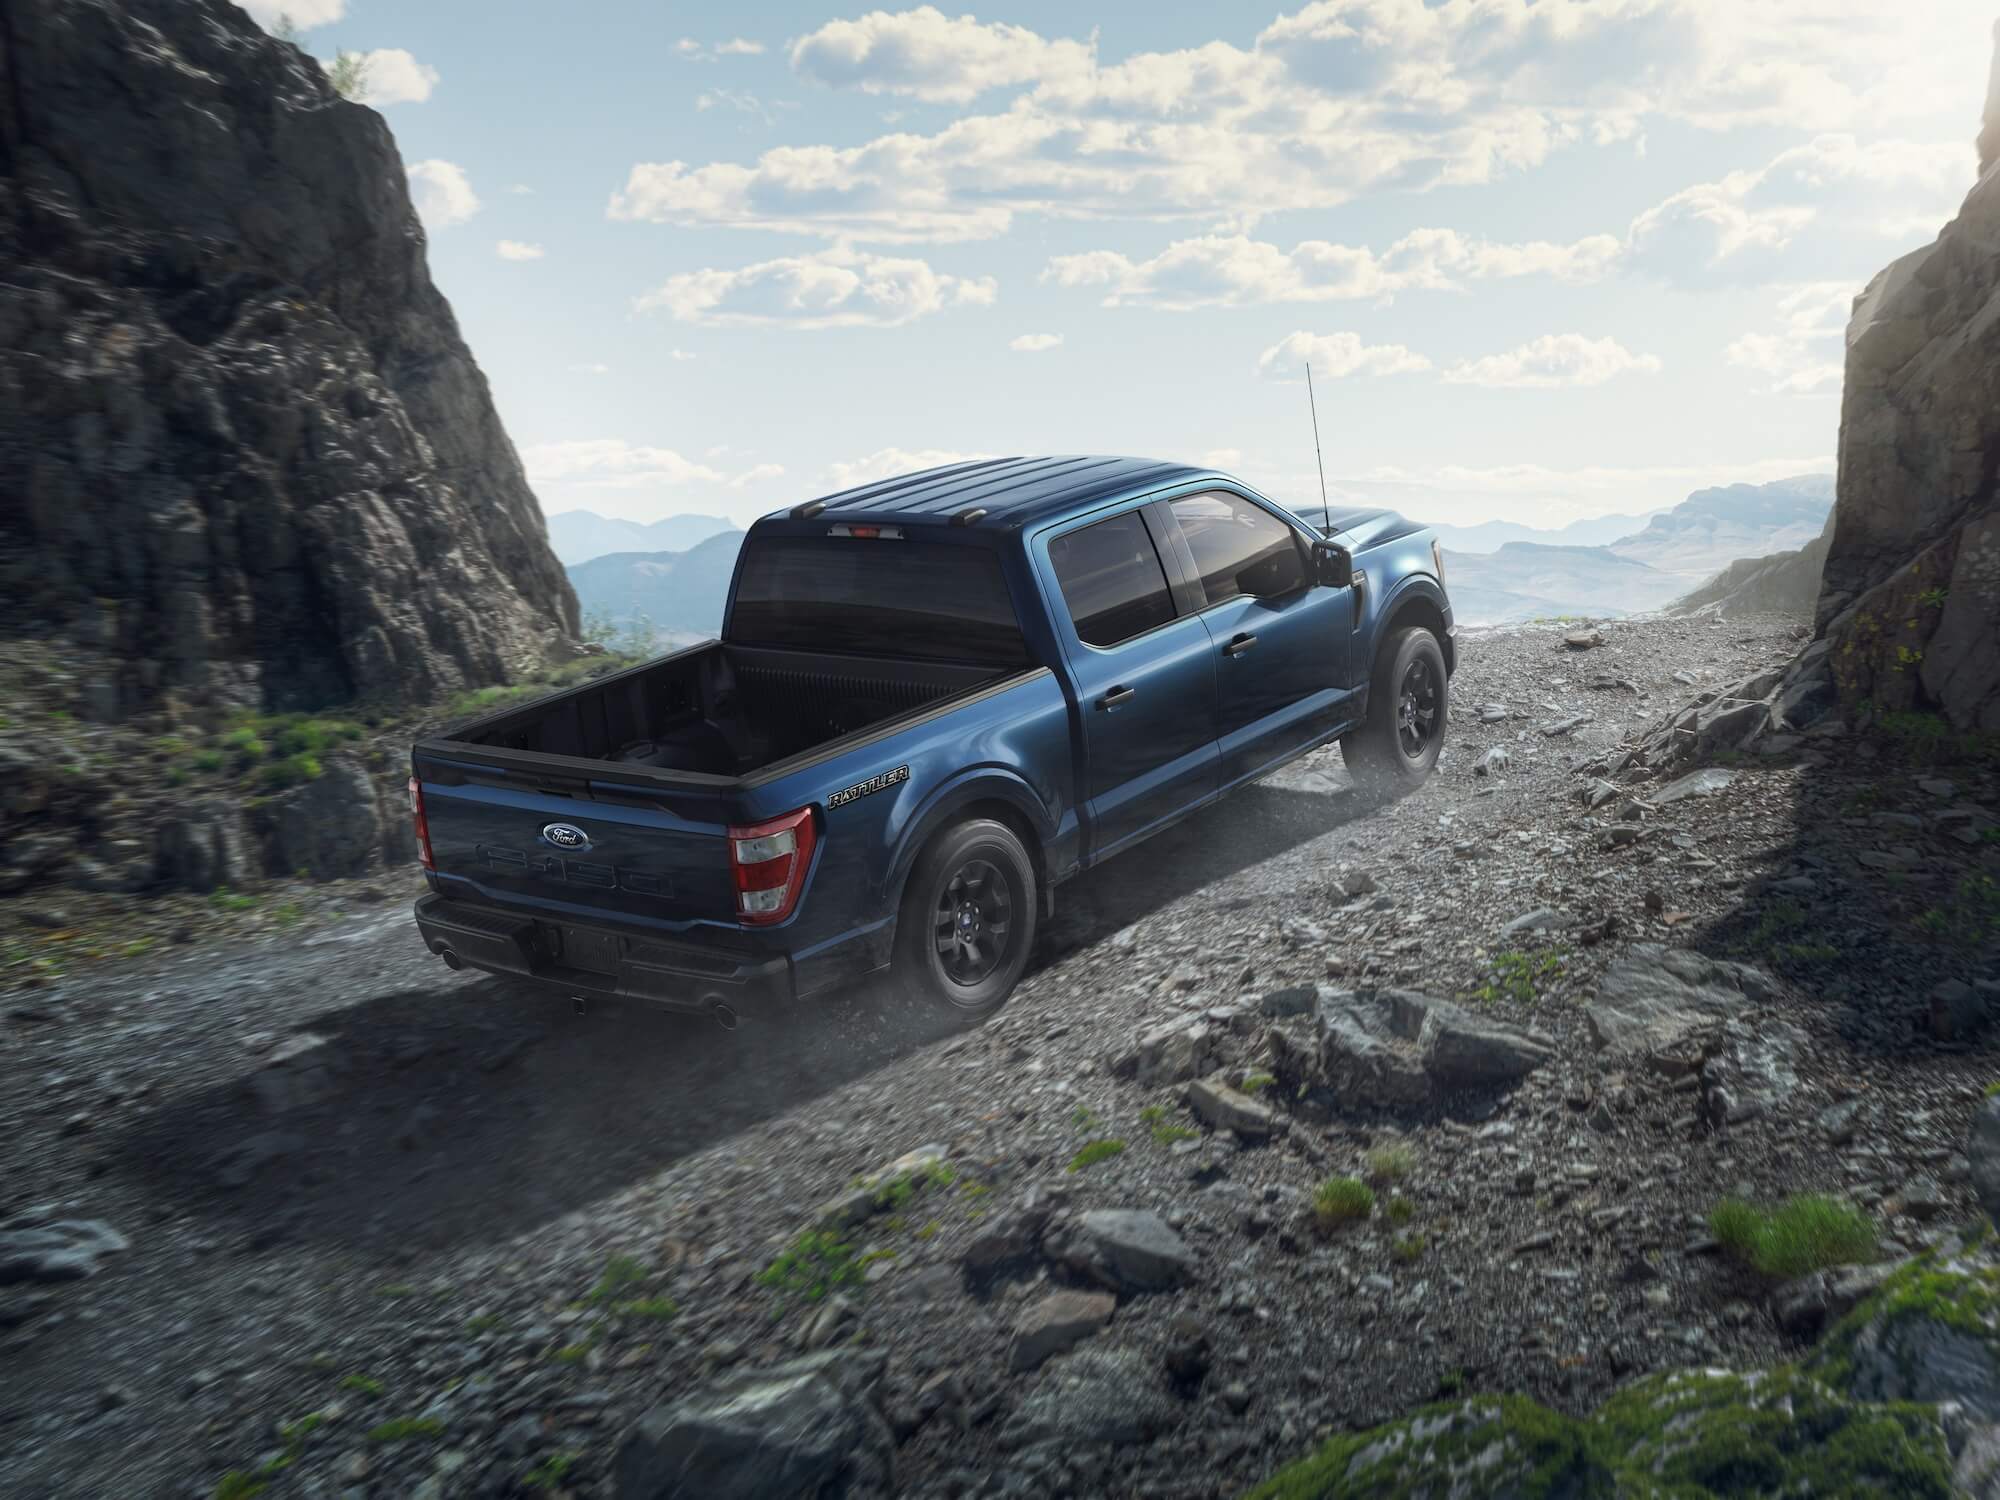 The 2023 Ford F-150 with one cab configuration climbing up a mountain